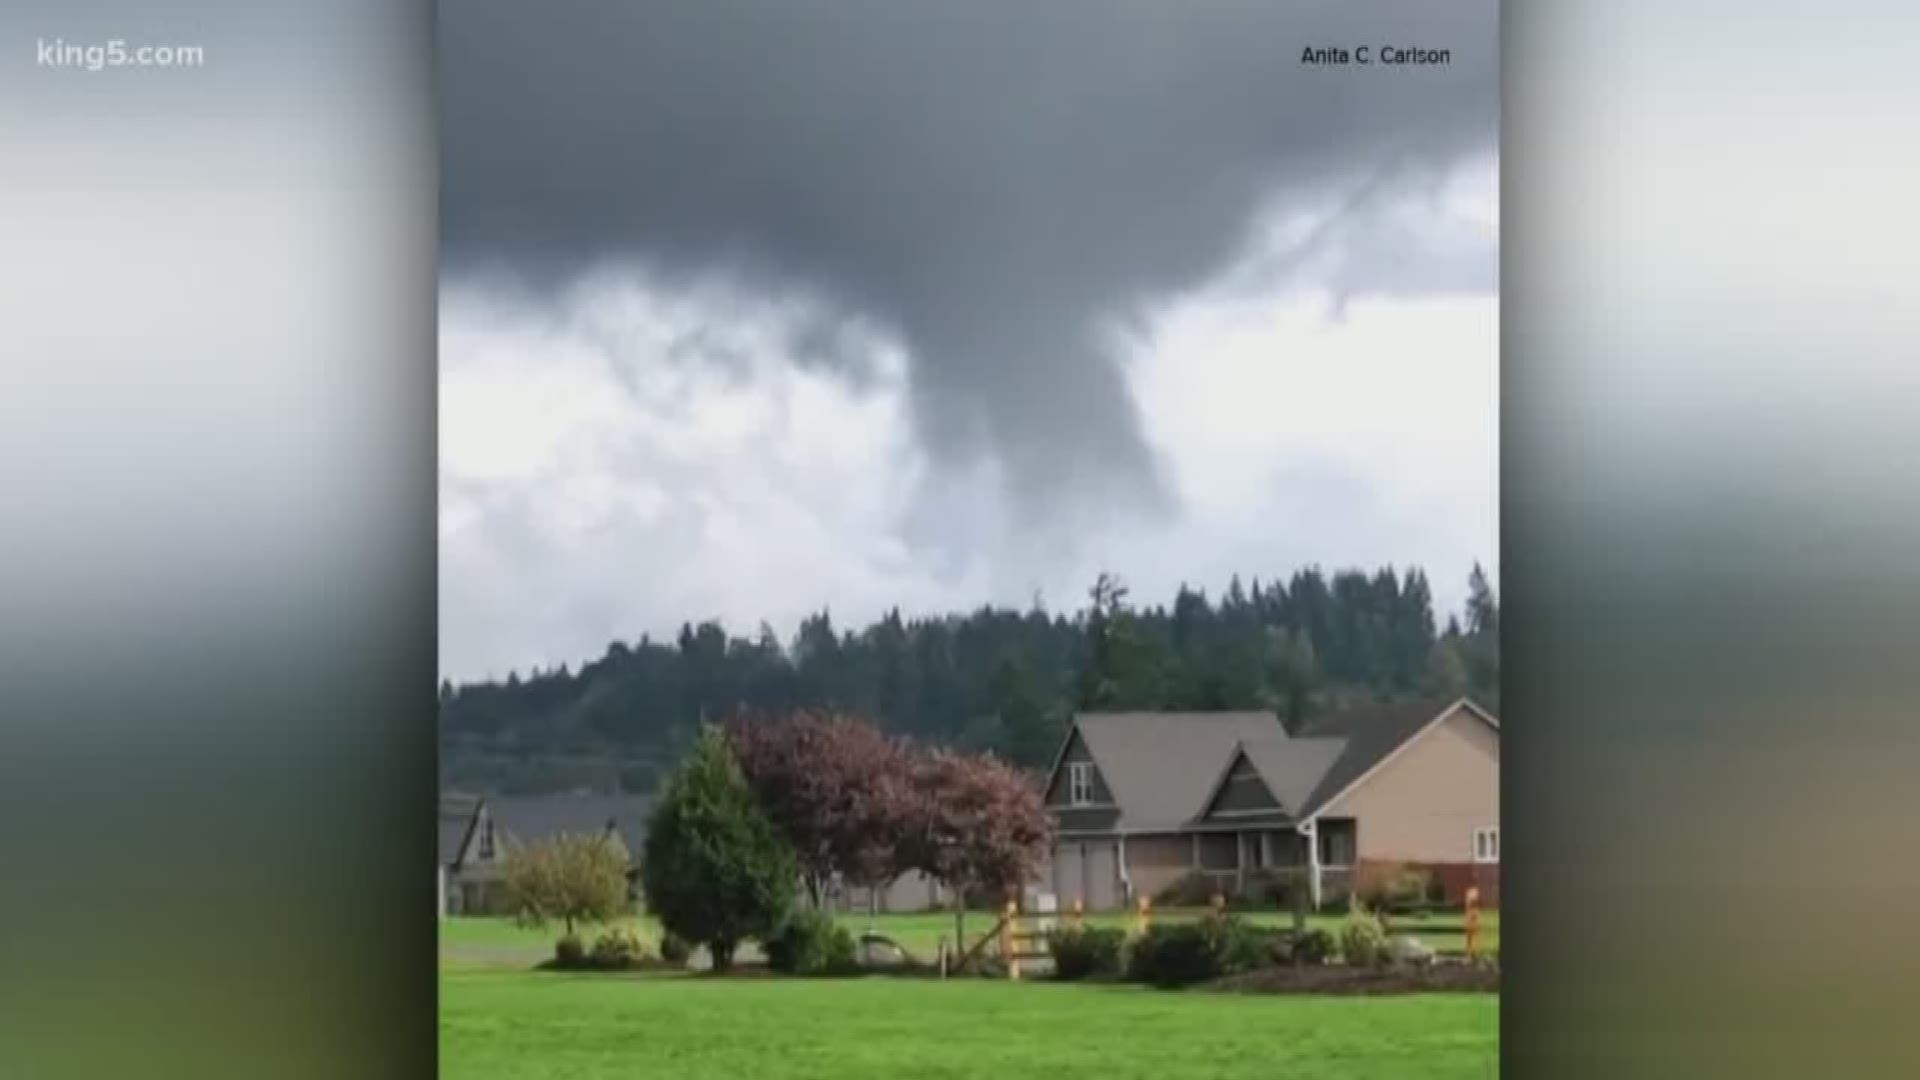 The tornado was rated as an EF-U by The National Weather Service Seattle because it was brief, weak and did not cause any damage.